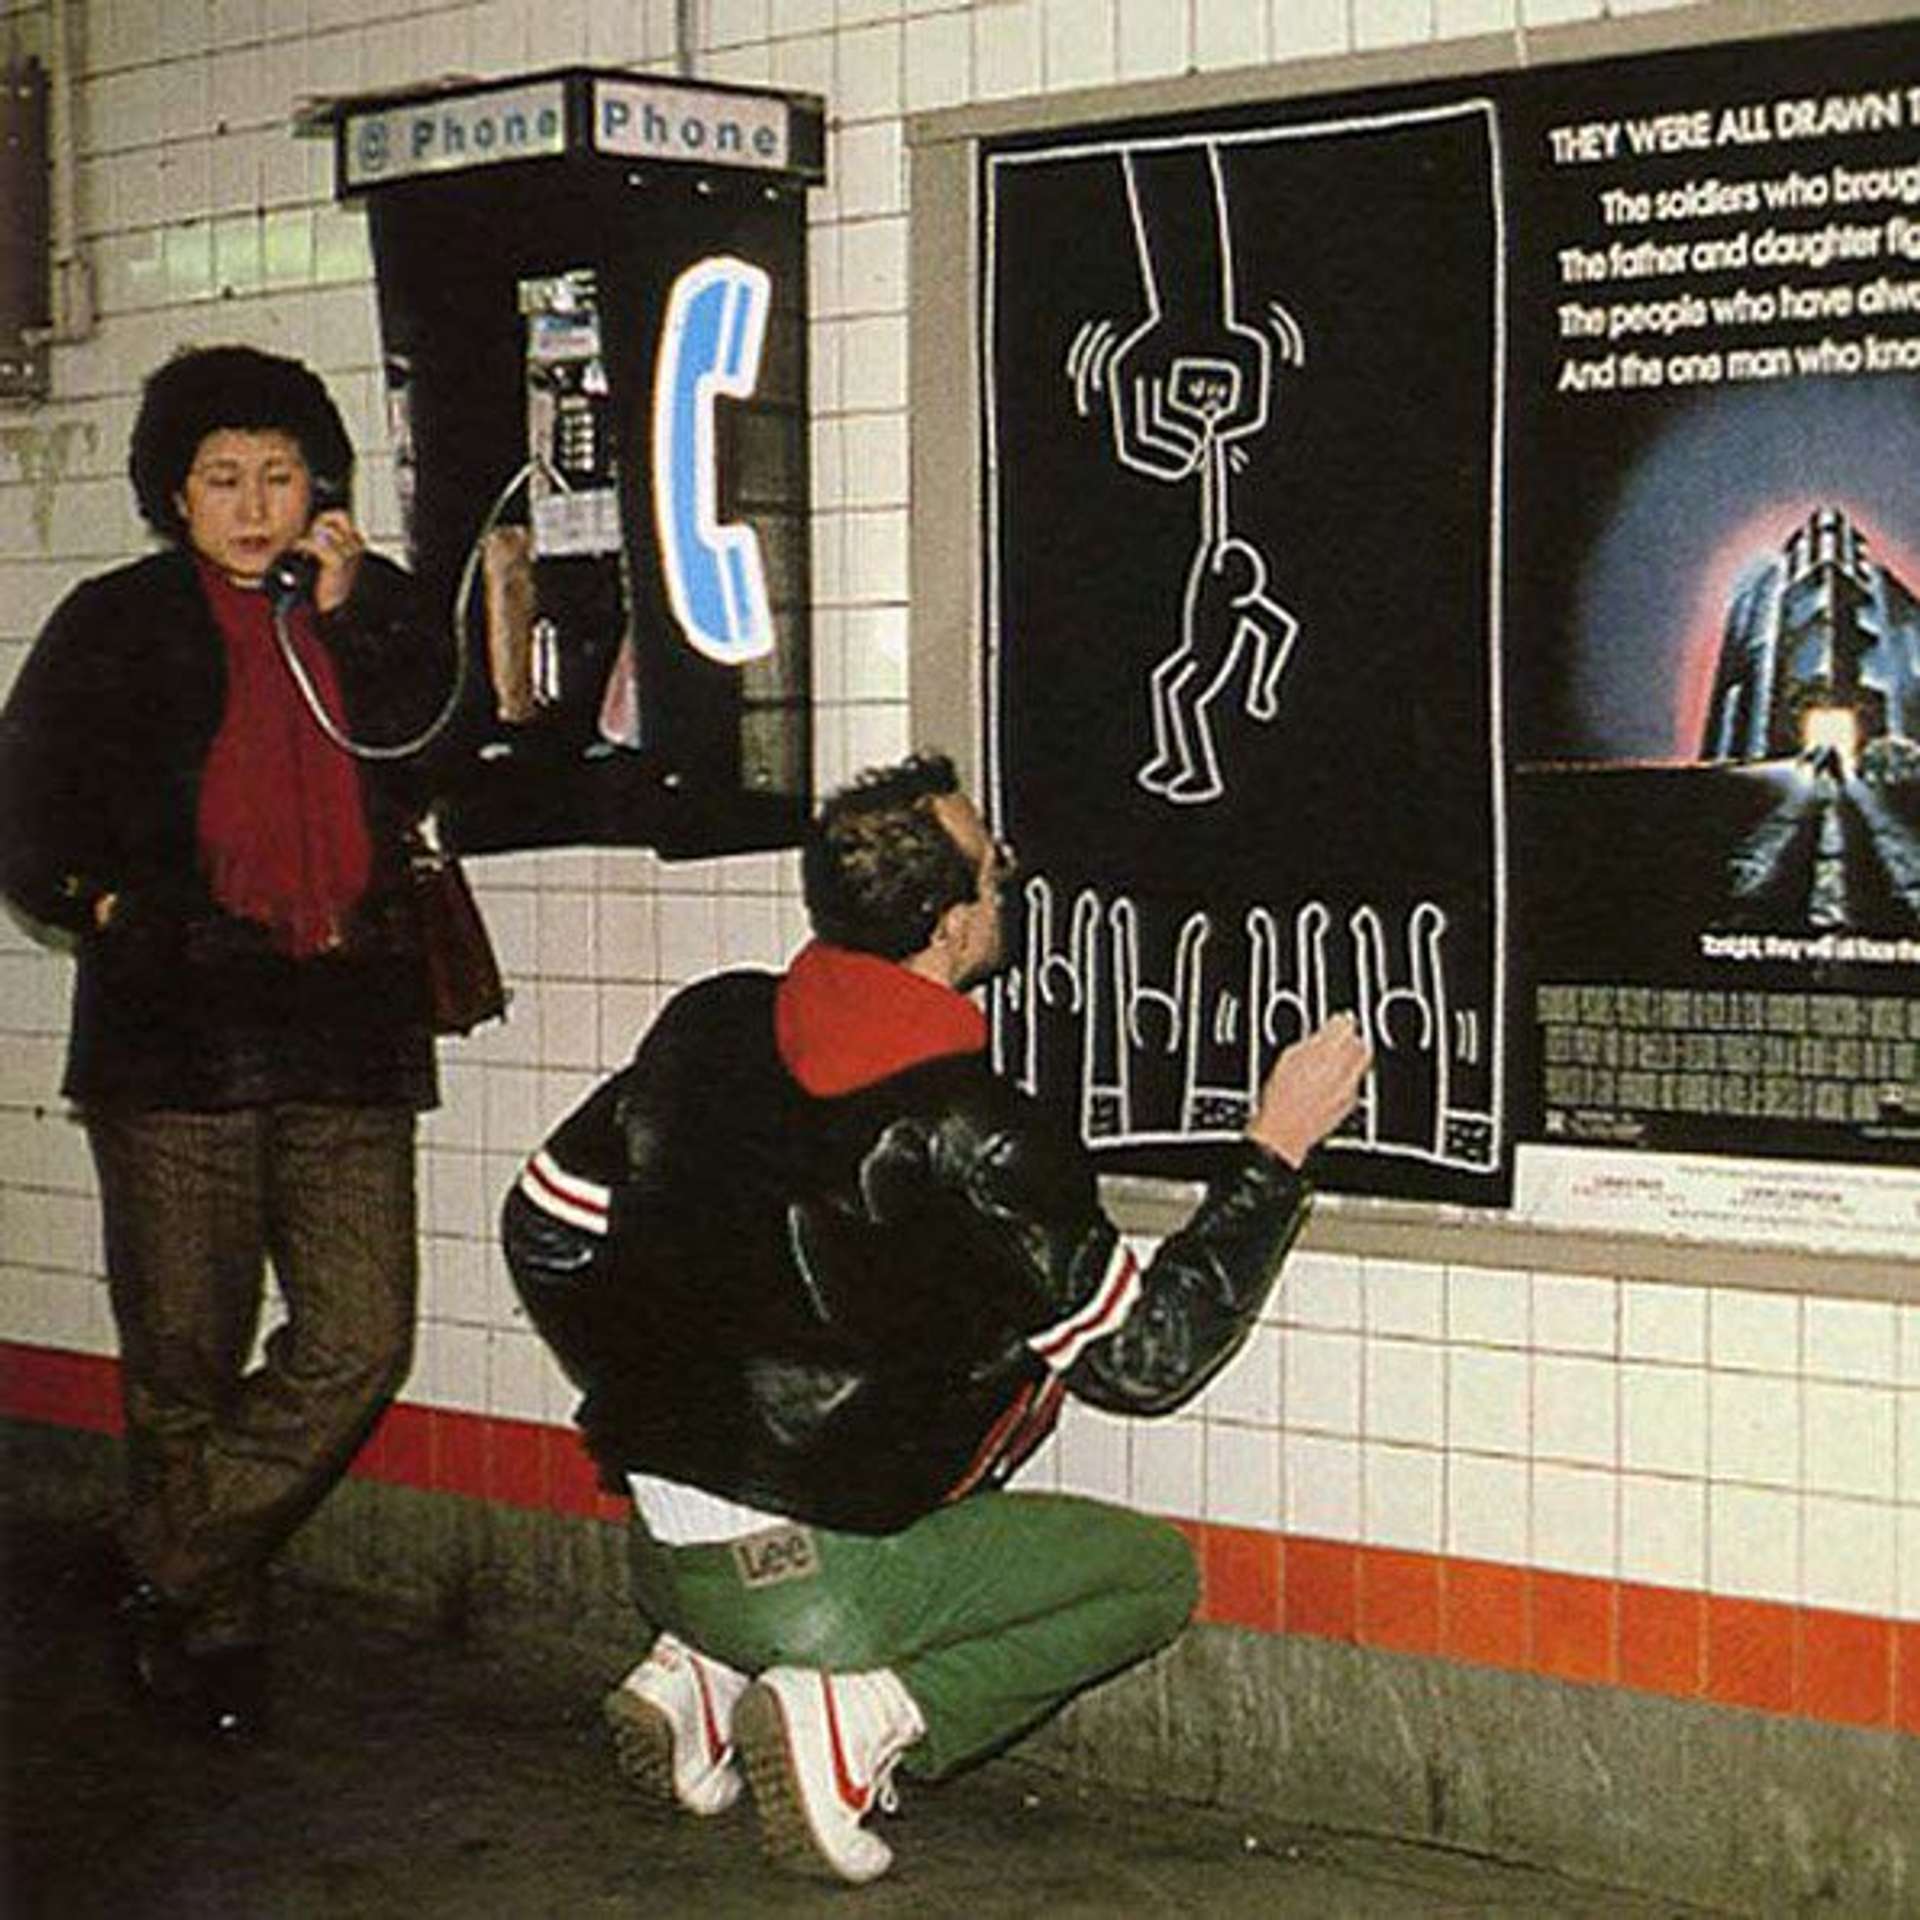 Keith Haring drawing in the New York Subway